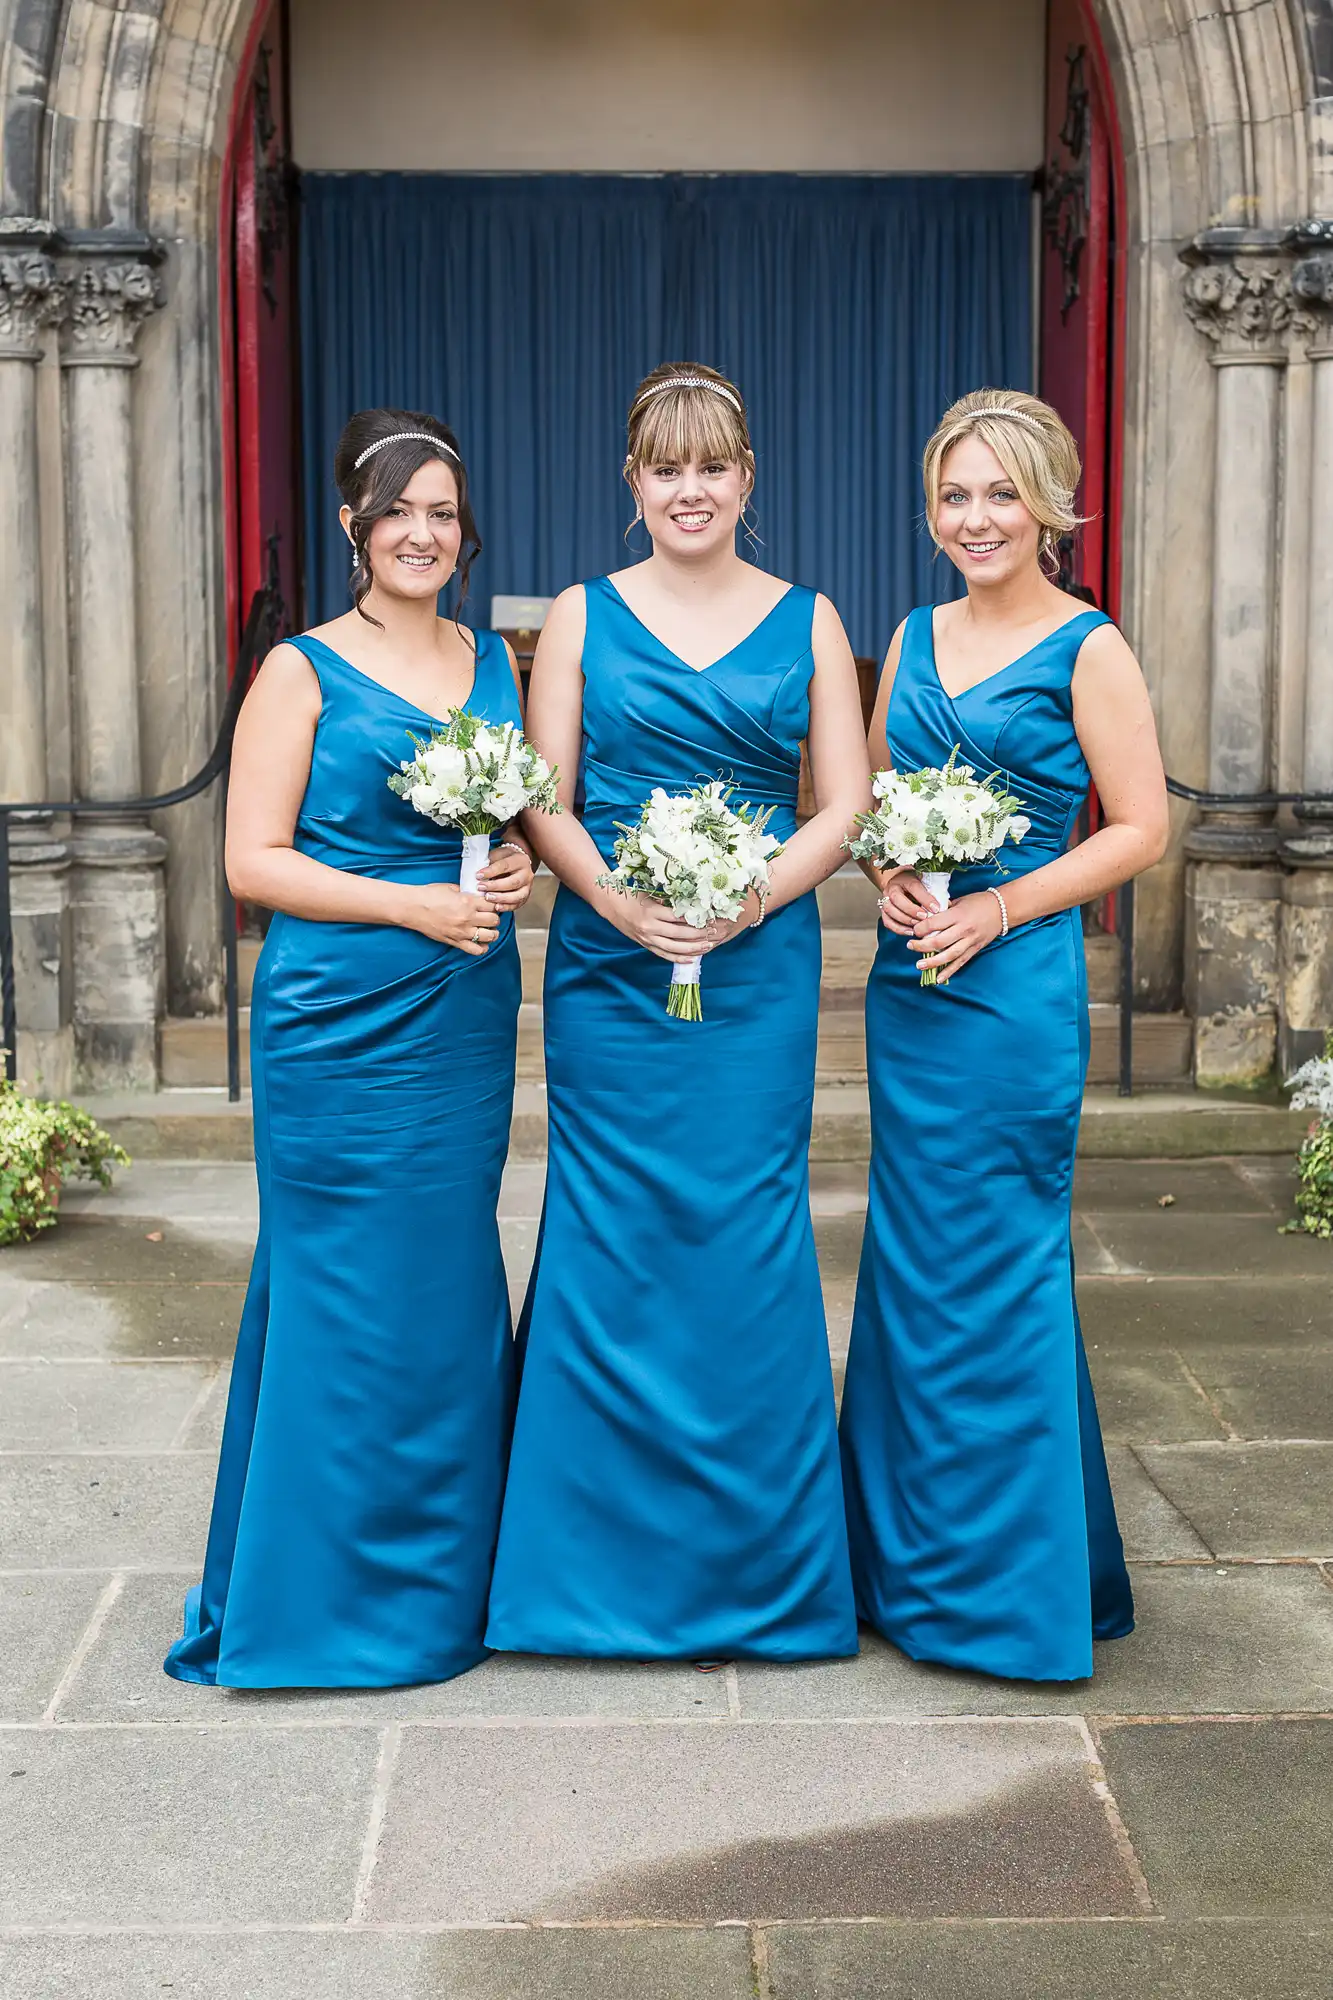 Three women in matching blue dresses holding bouquets, posing in front of an old church entrance.